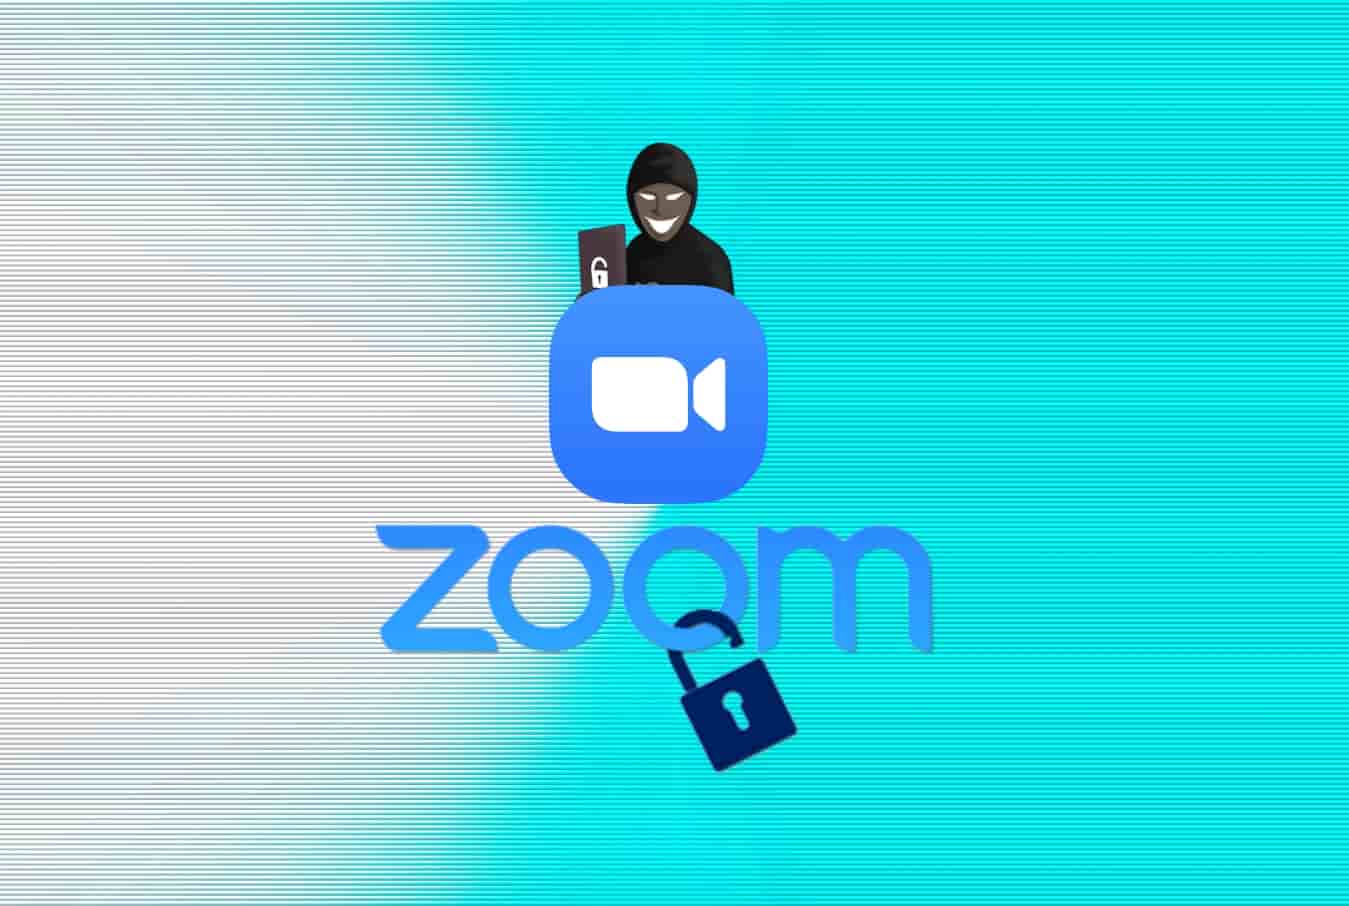 New vulnerabilities could allow hackers spy on your Zoom meetings